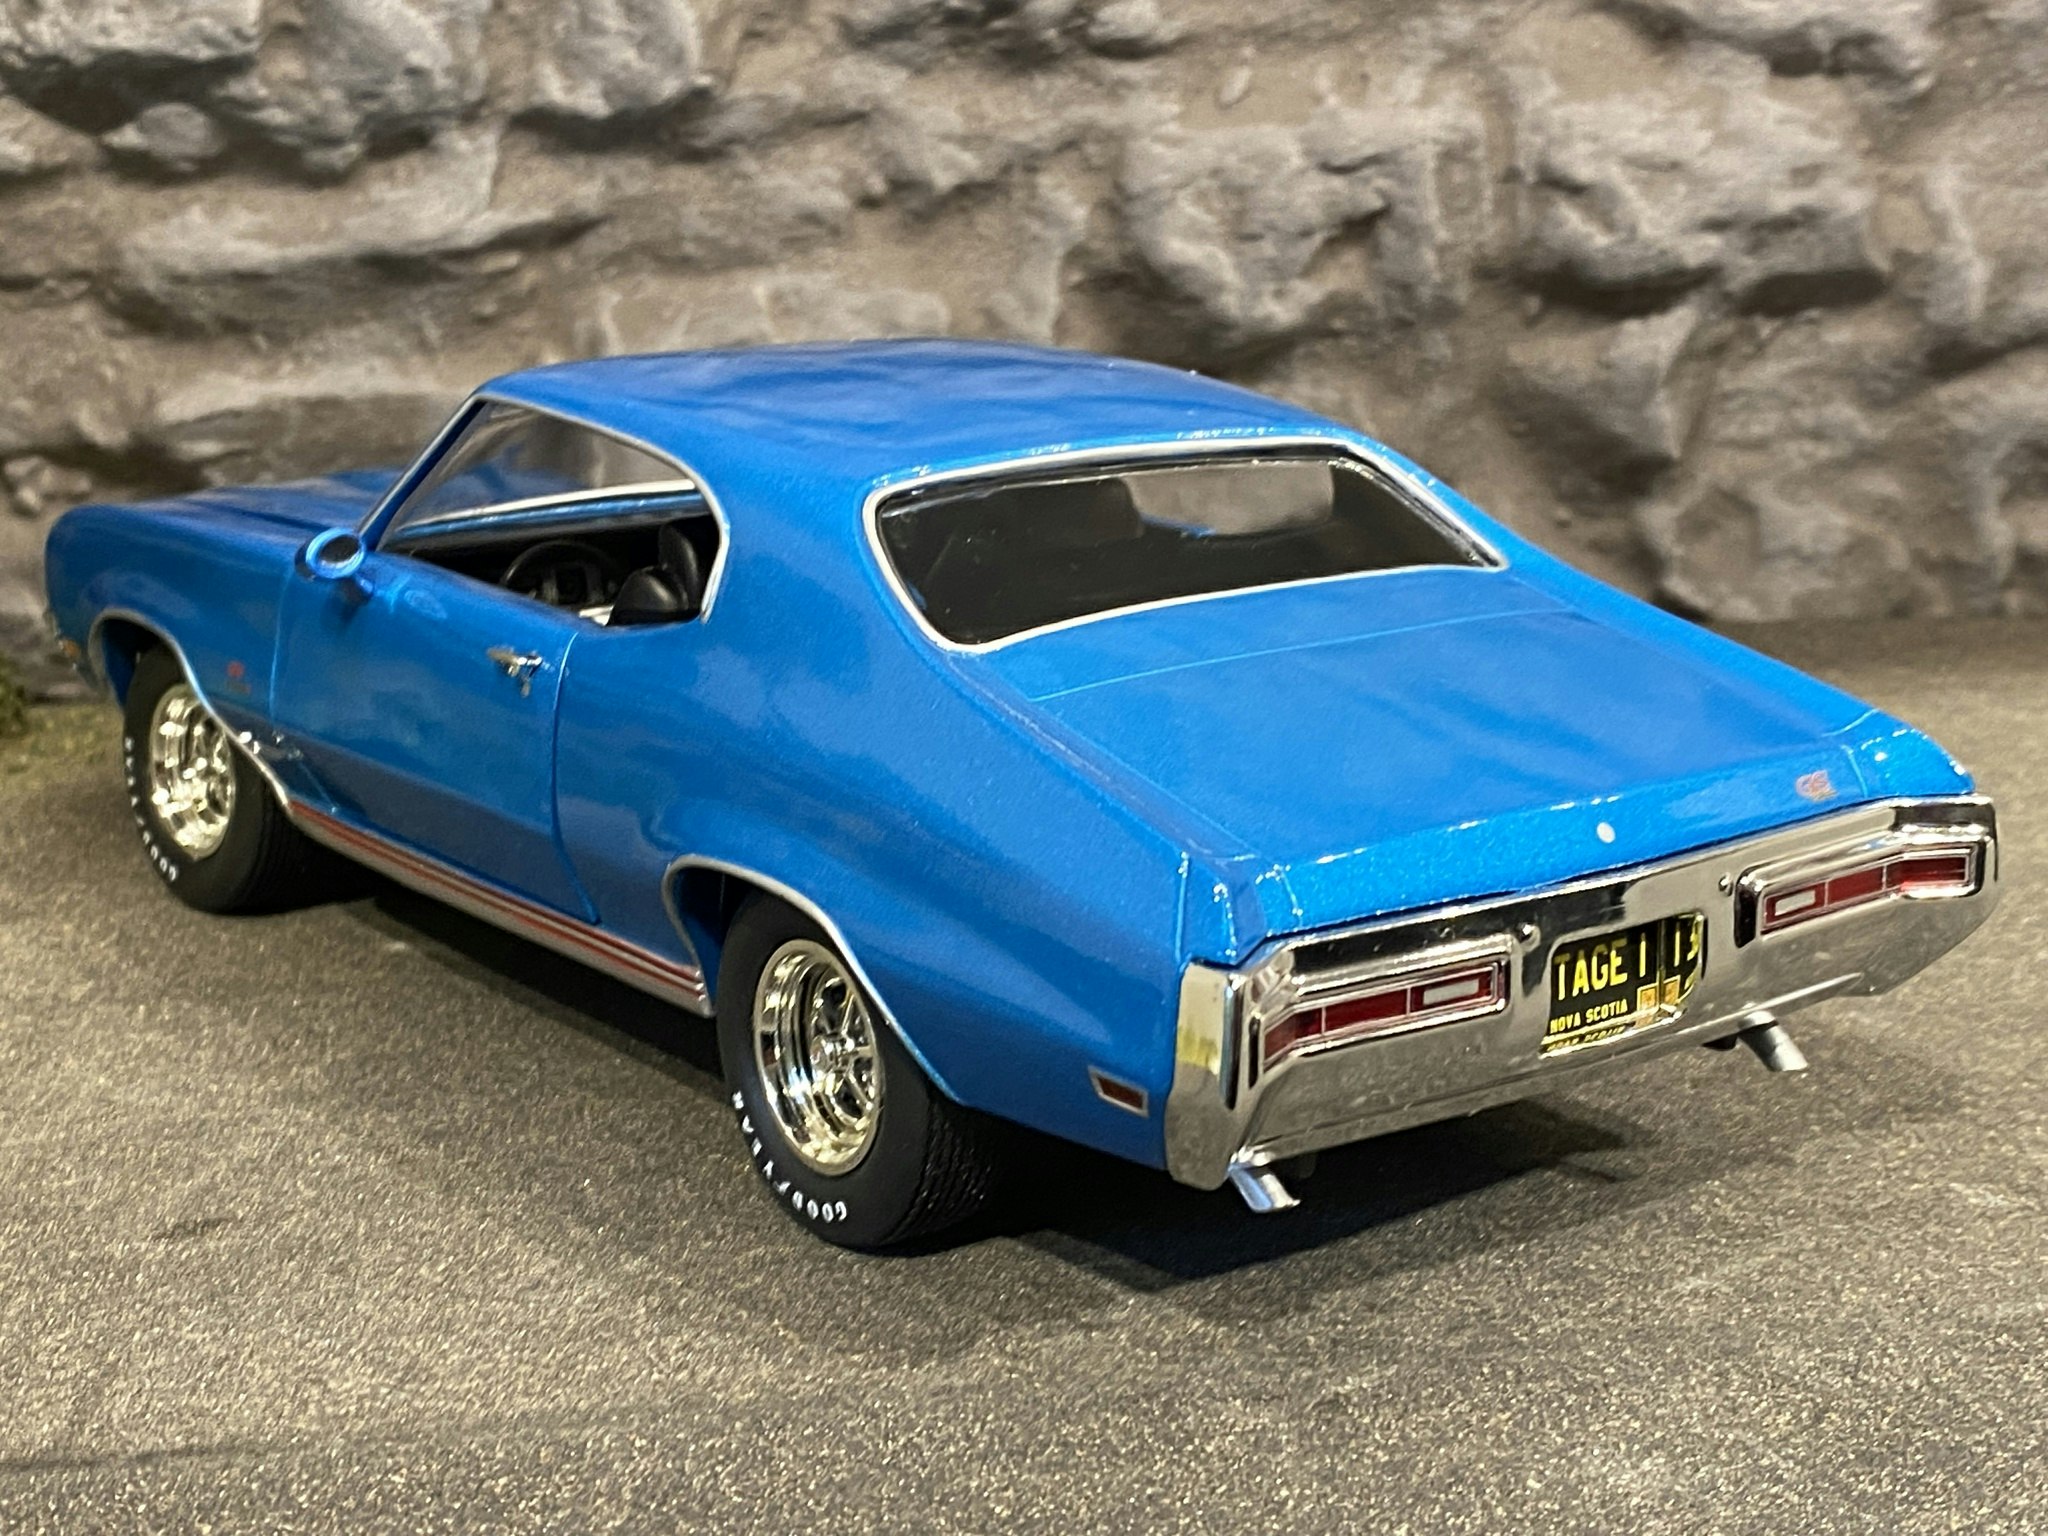 Skala 1/18 Buick GS Stage 1, 1971' fr Auto world "American Muscle"